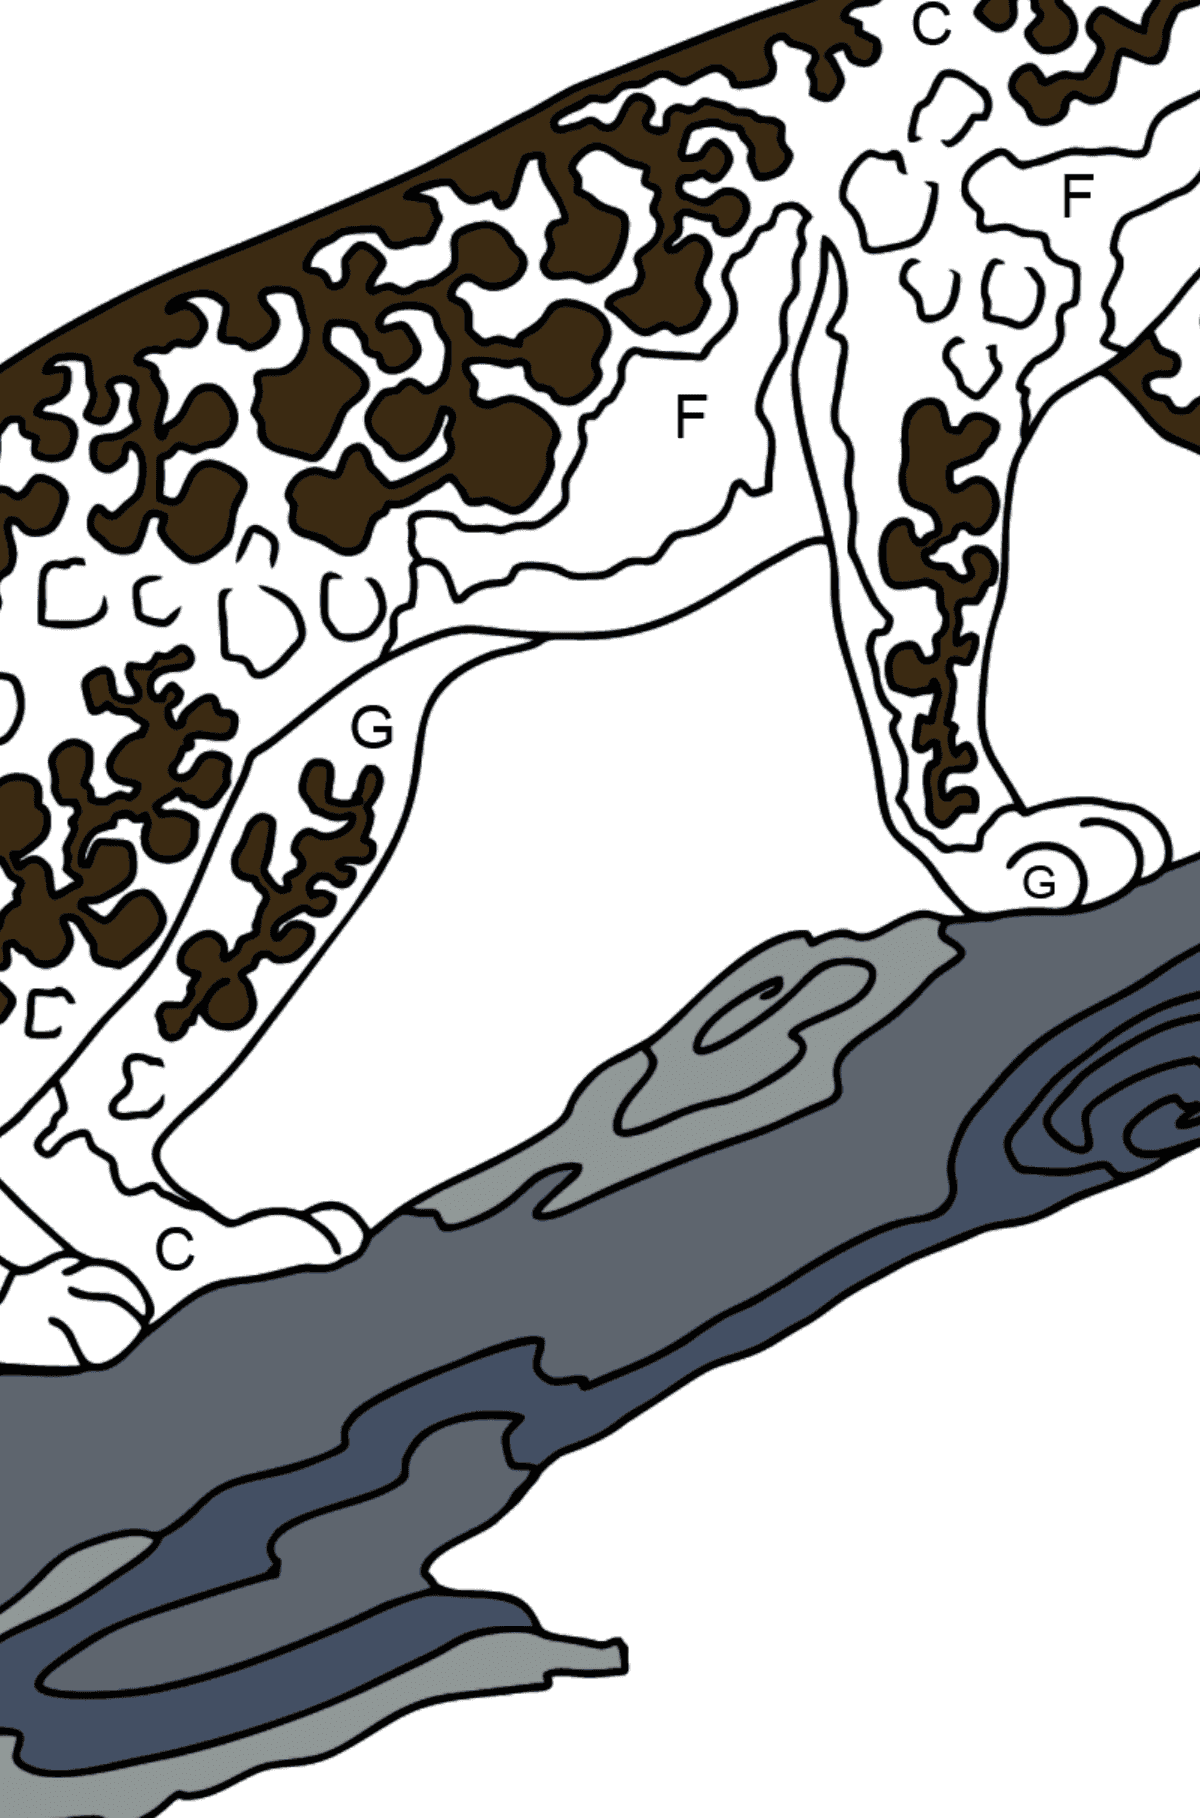 Coloring Page - A Leopard on a Branch - Coloring by Letters for Kids